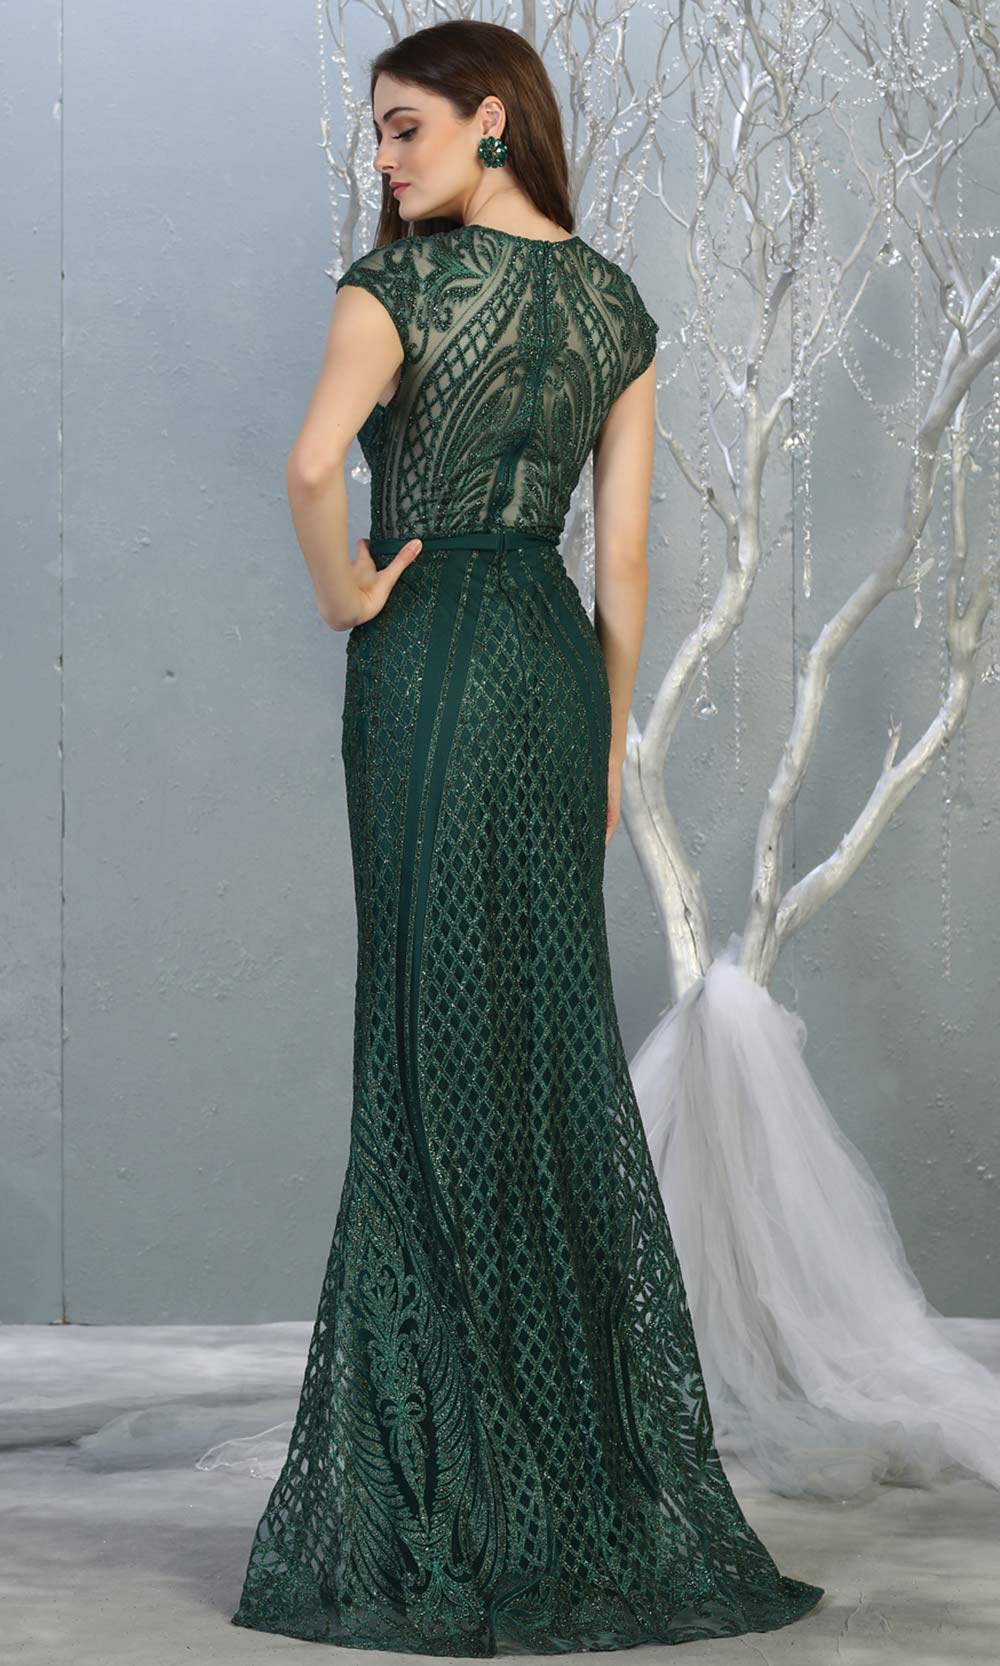 Mayqueen MQ1722 long hunter green beaded fitted dress w/ high neck. This sleek & sexy modest evening dress is perfect for prom, engagement/e-shoot dress, formal wedding guest dress, wedding reception dress. Plus sizes avail in this dark green dress-b.jpg